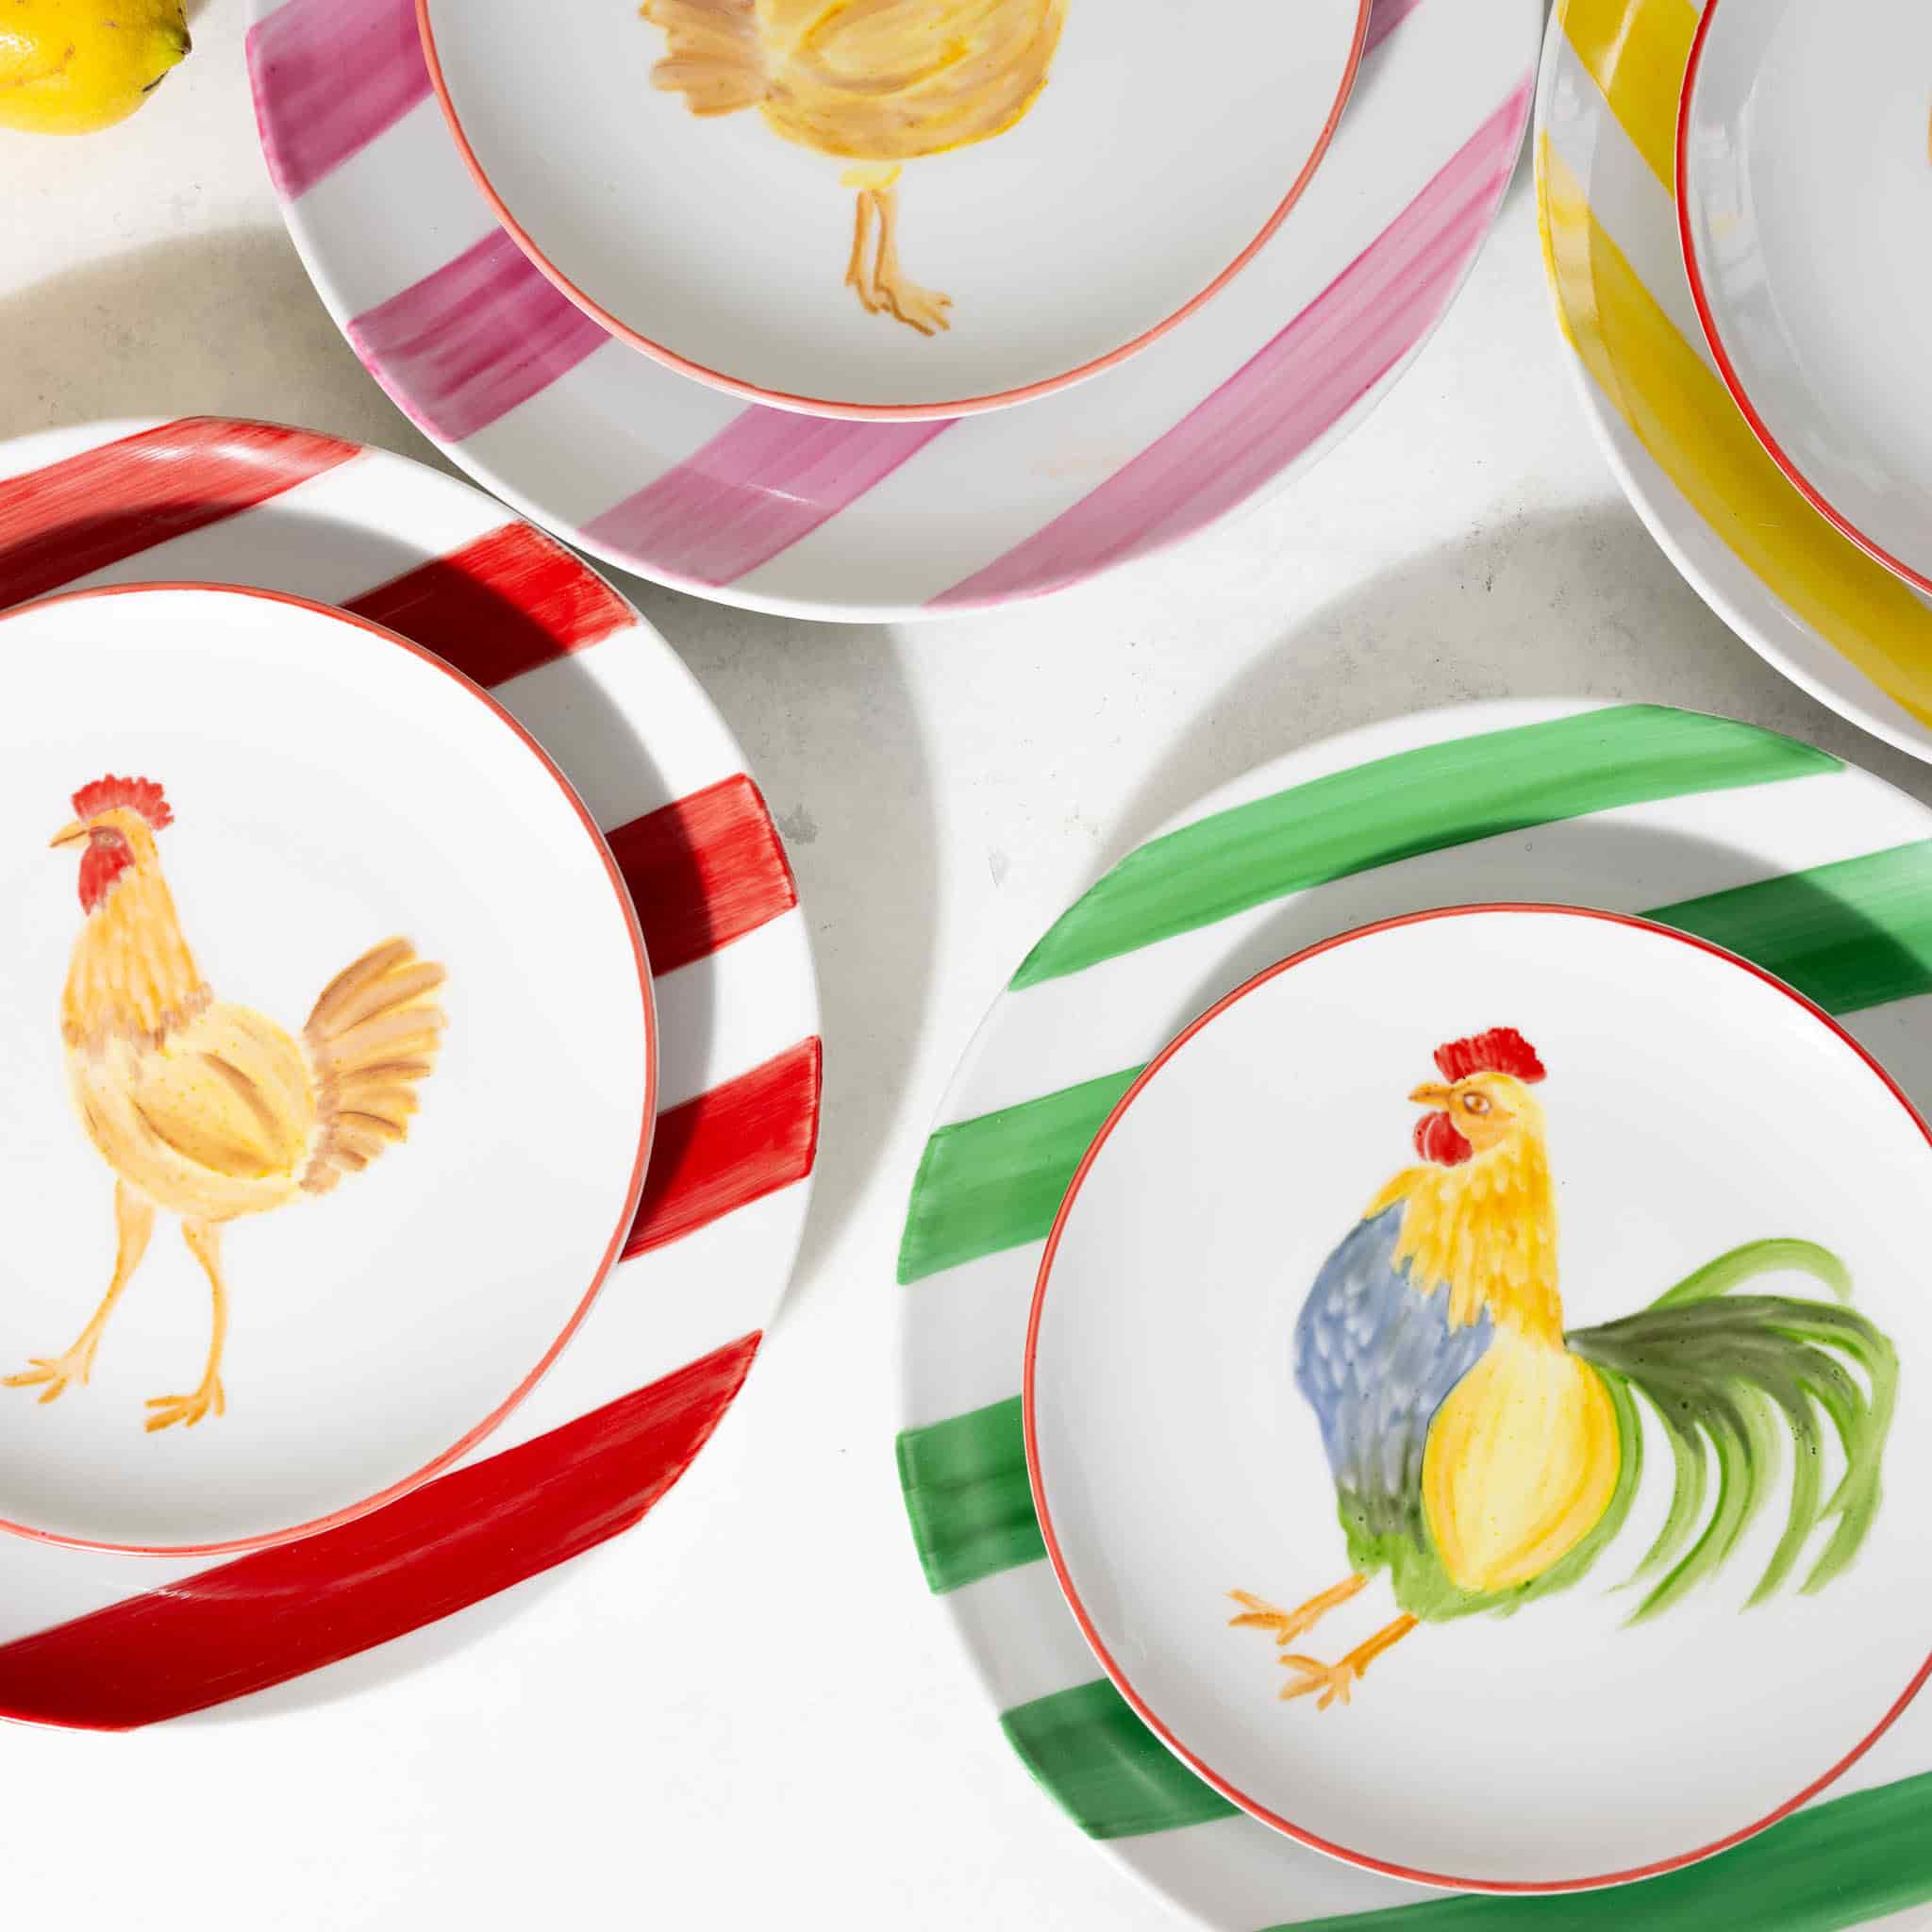 The Platera Manolo Rooster Porcelain Side Plate, 21cm